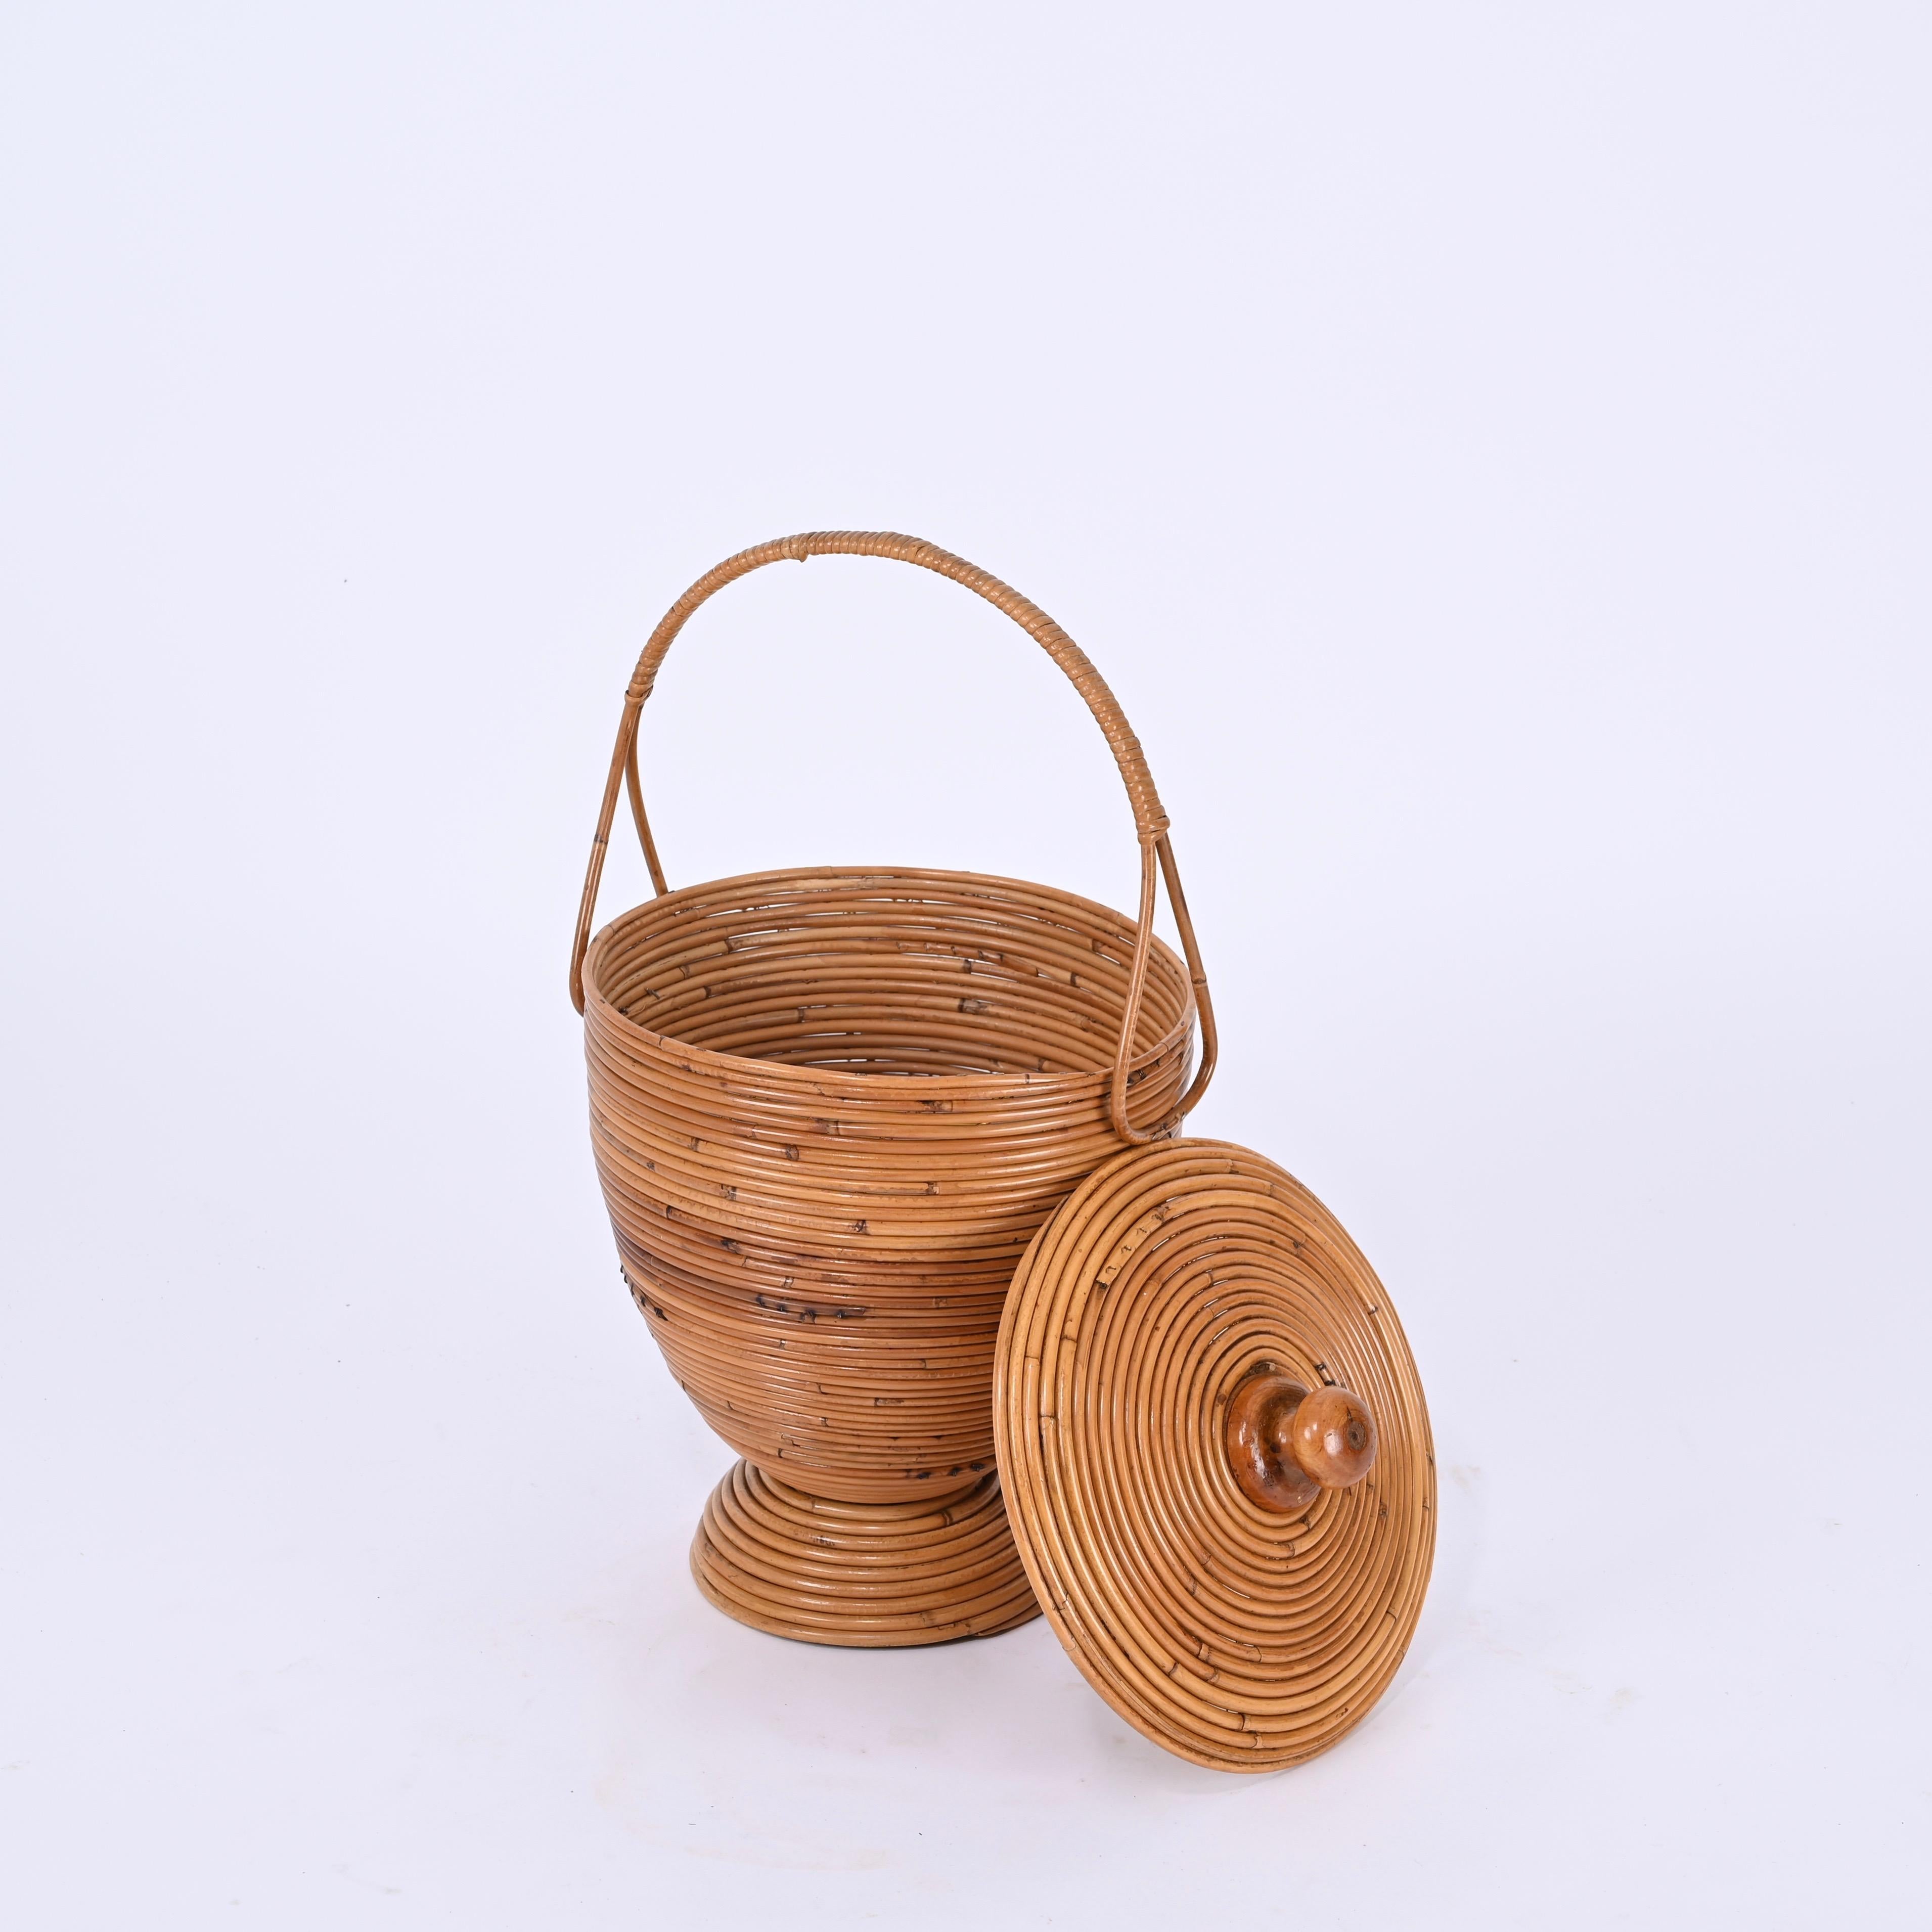 Hand-Crafted Mid-Century Decorative Basket in Rattan and Wicker by Vivai del Sud, Italy 1970s For Sale